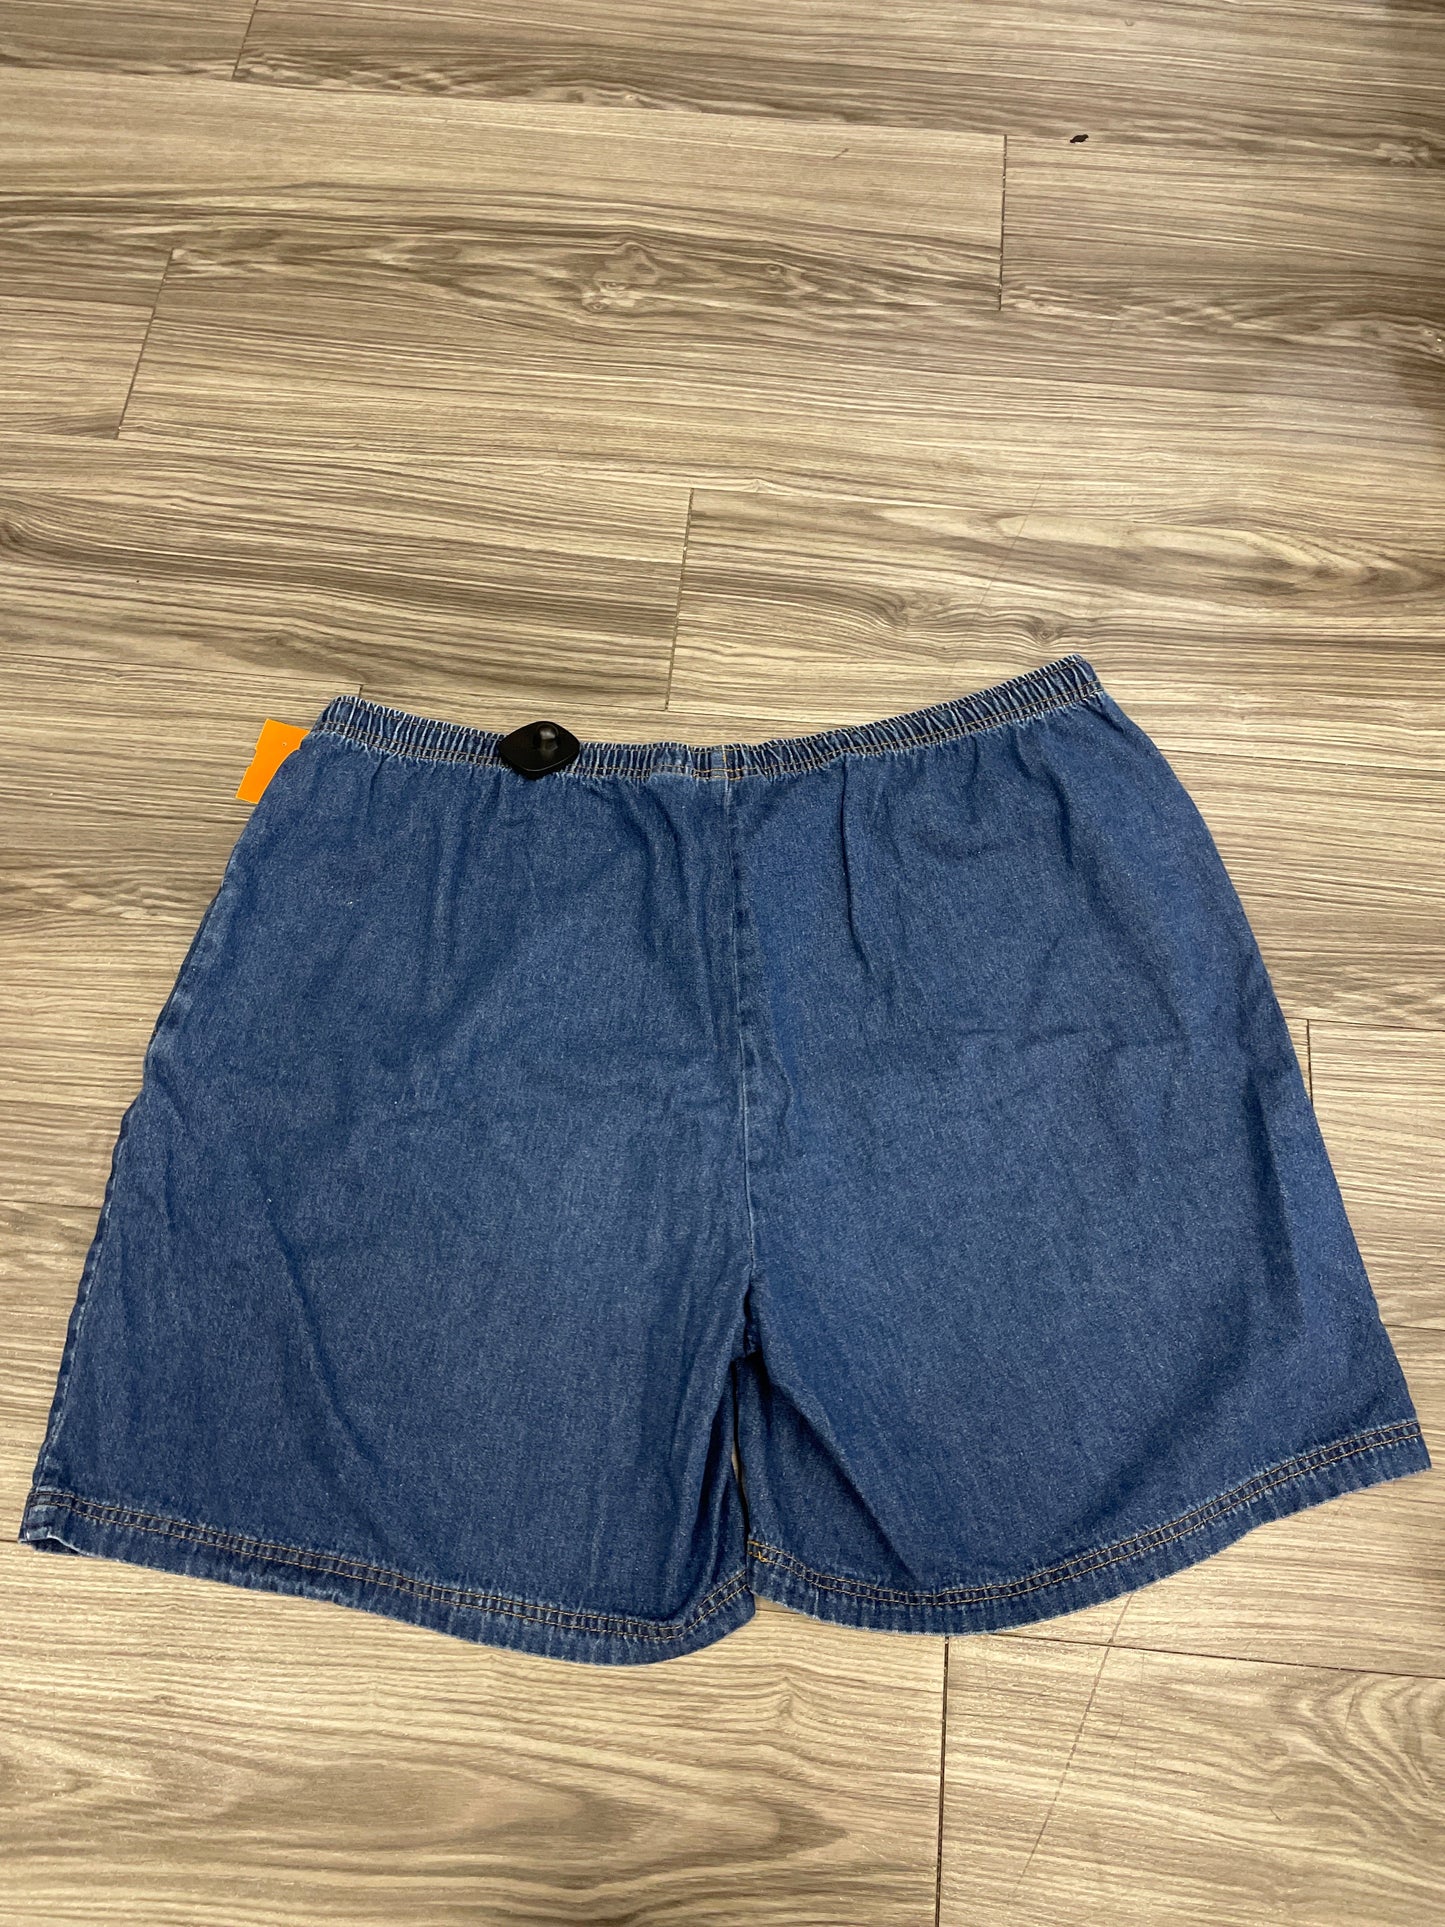 Shorts By Baxter And Wells  Size: 2x